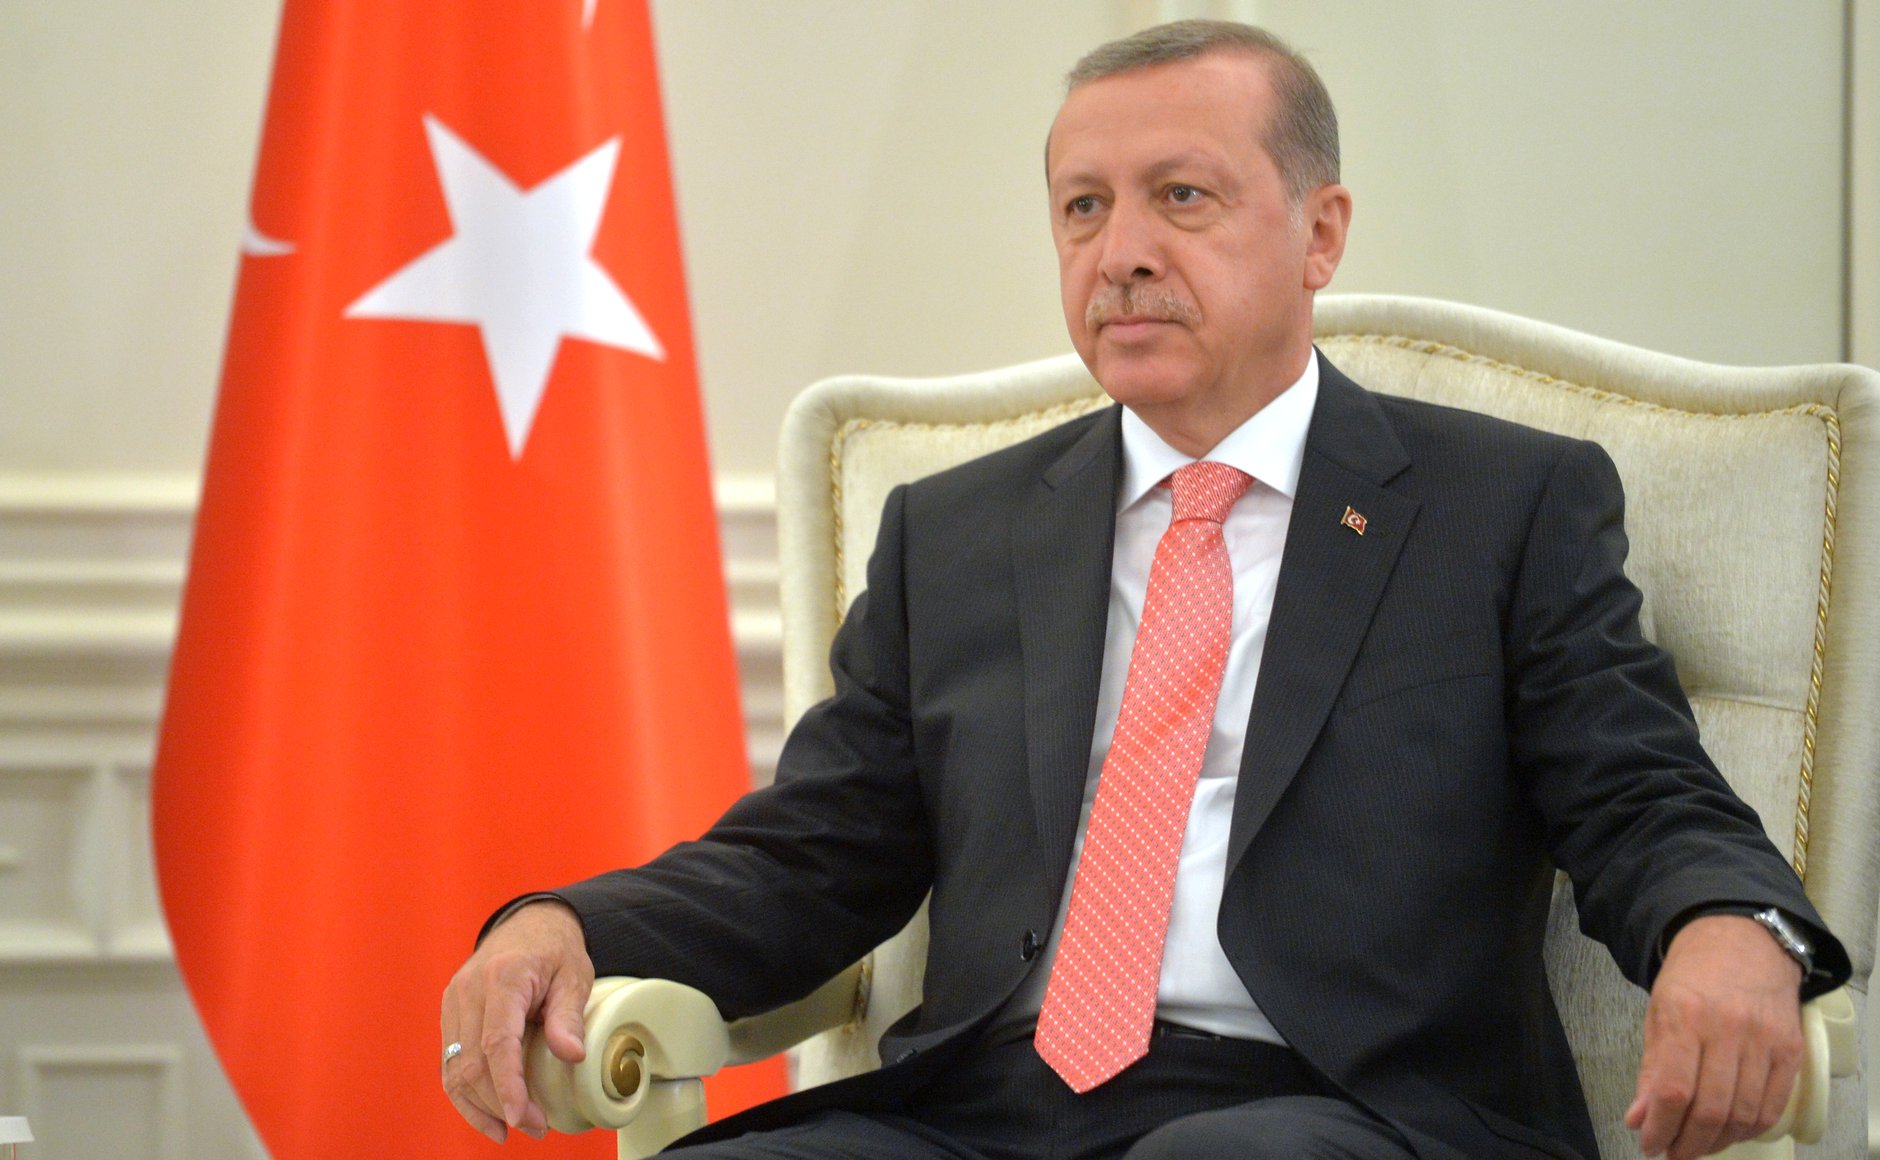 Turkey Offers Legal Cover To Sexual Predators, Uses Religion To ...